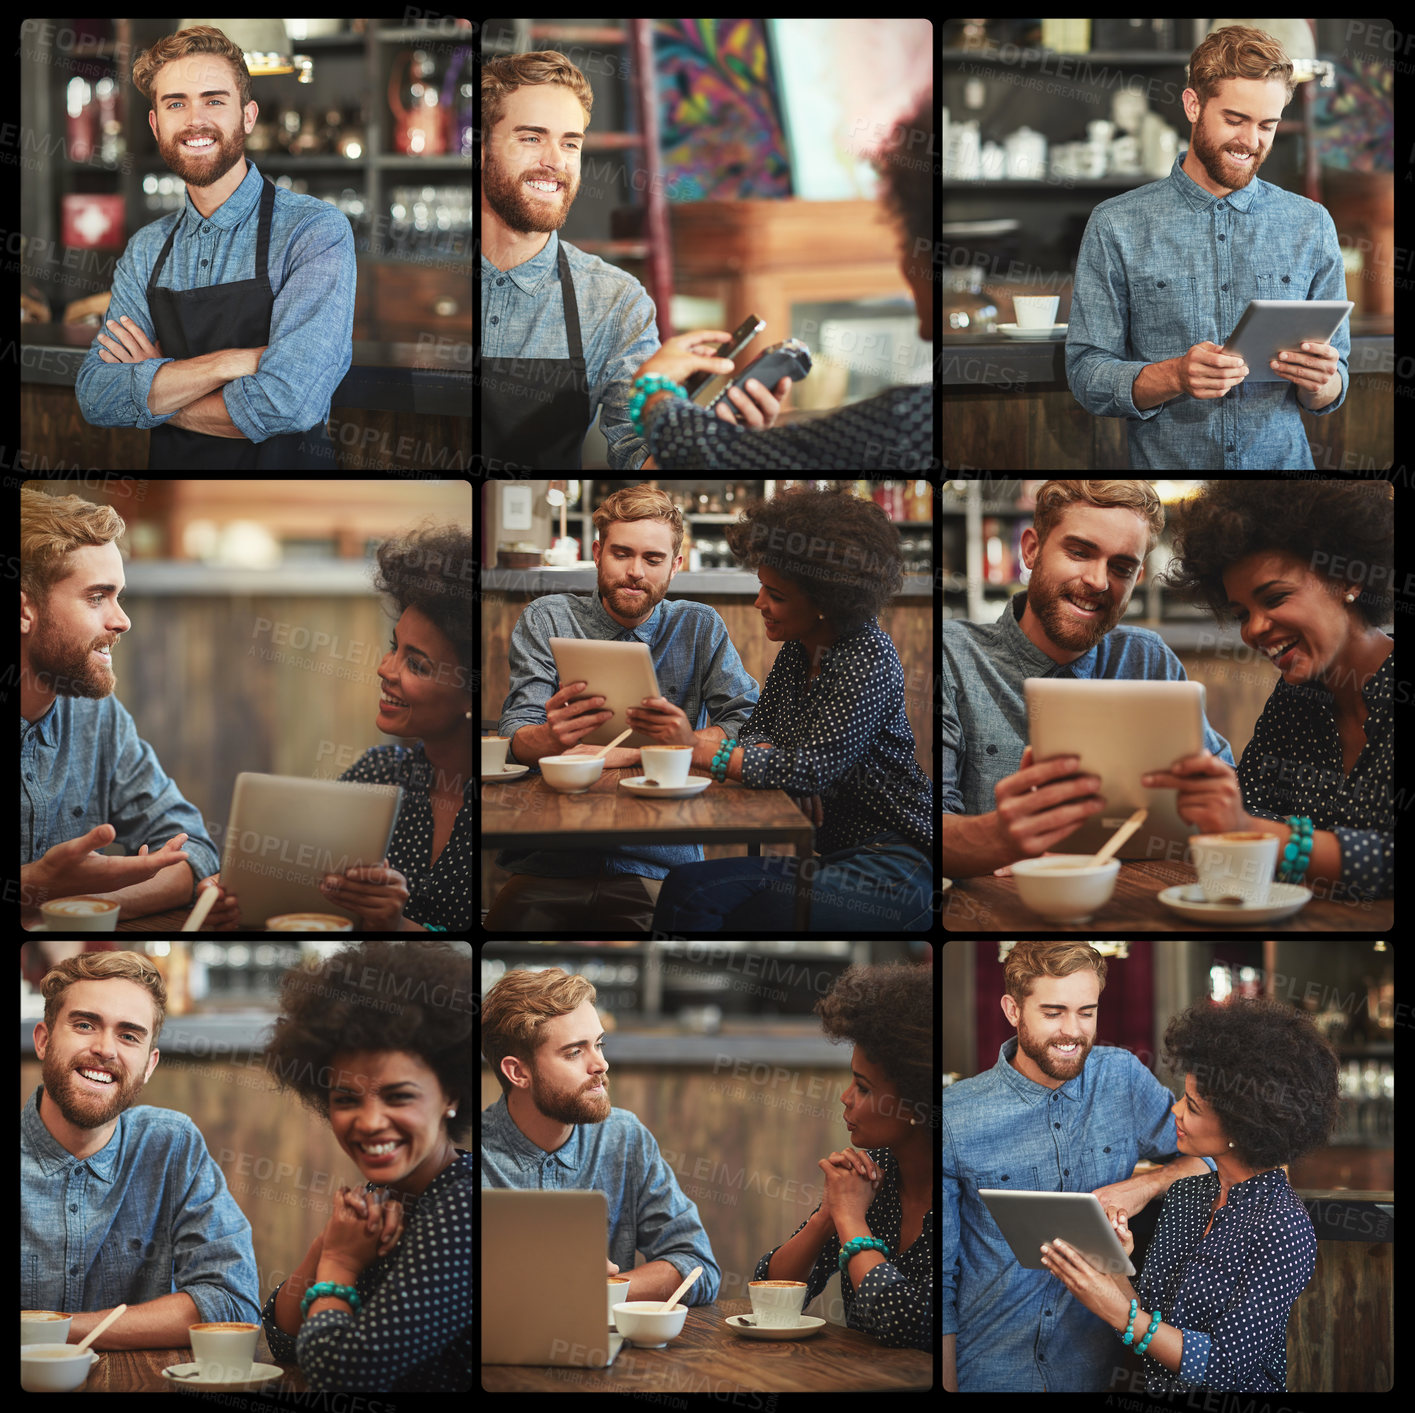 Buy stock photo Composite image of two young people in a coffee shop